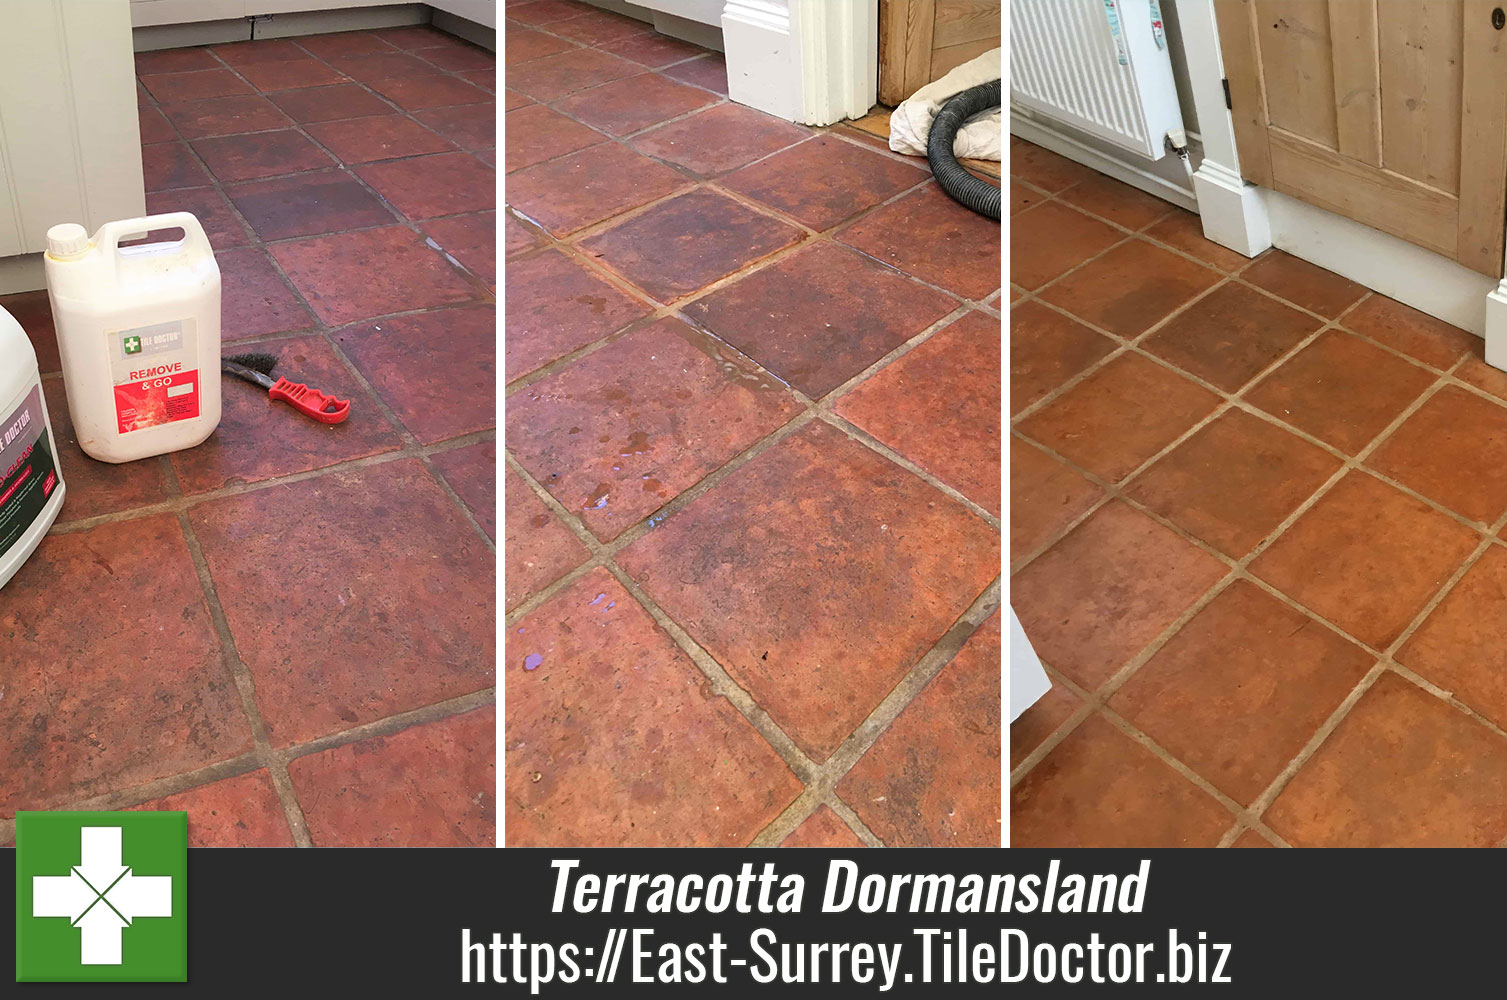 Terracotta Kitchen Floor Burnished with Remove and Go  in Dormansland